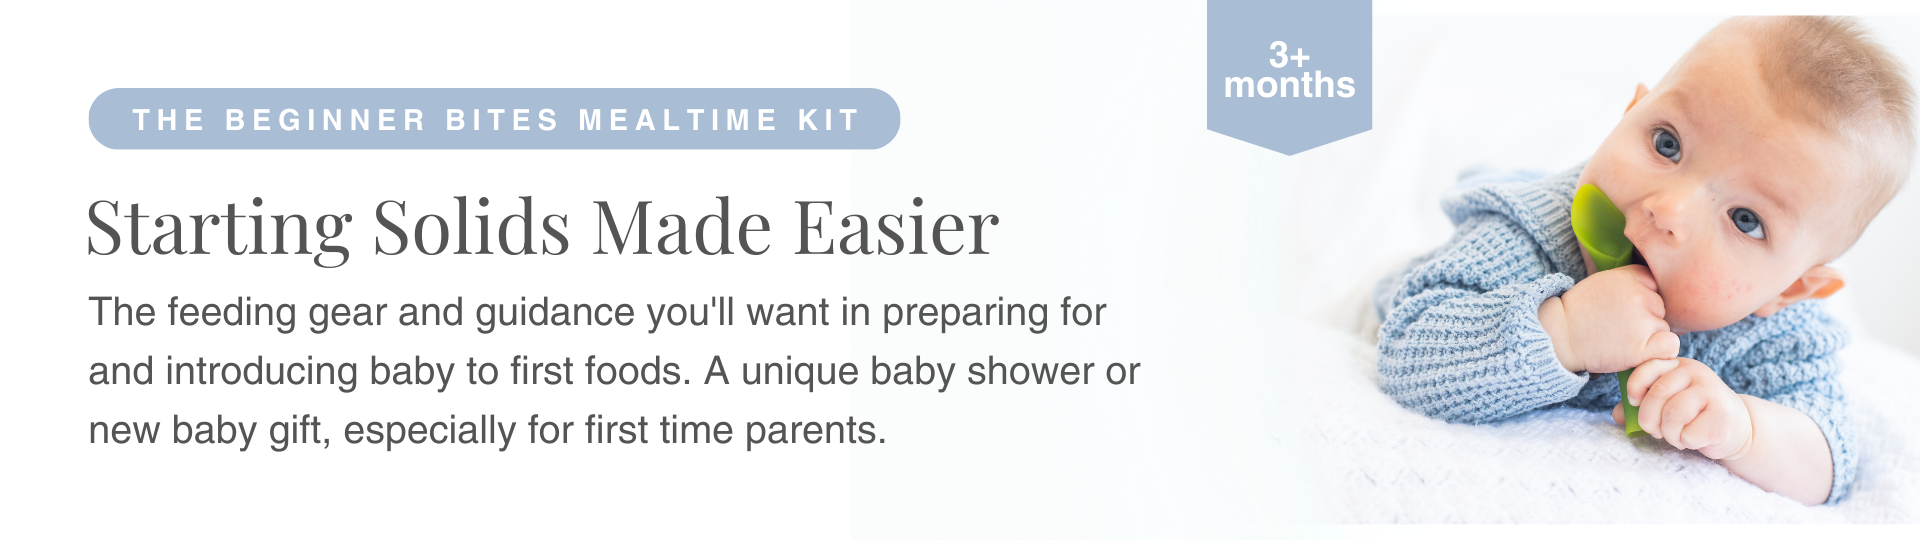 The Beginner Bites Mealtime Kit, a unique baby shower or new baby gift 